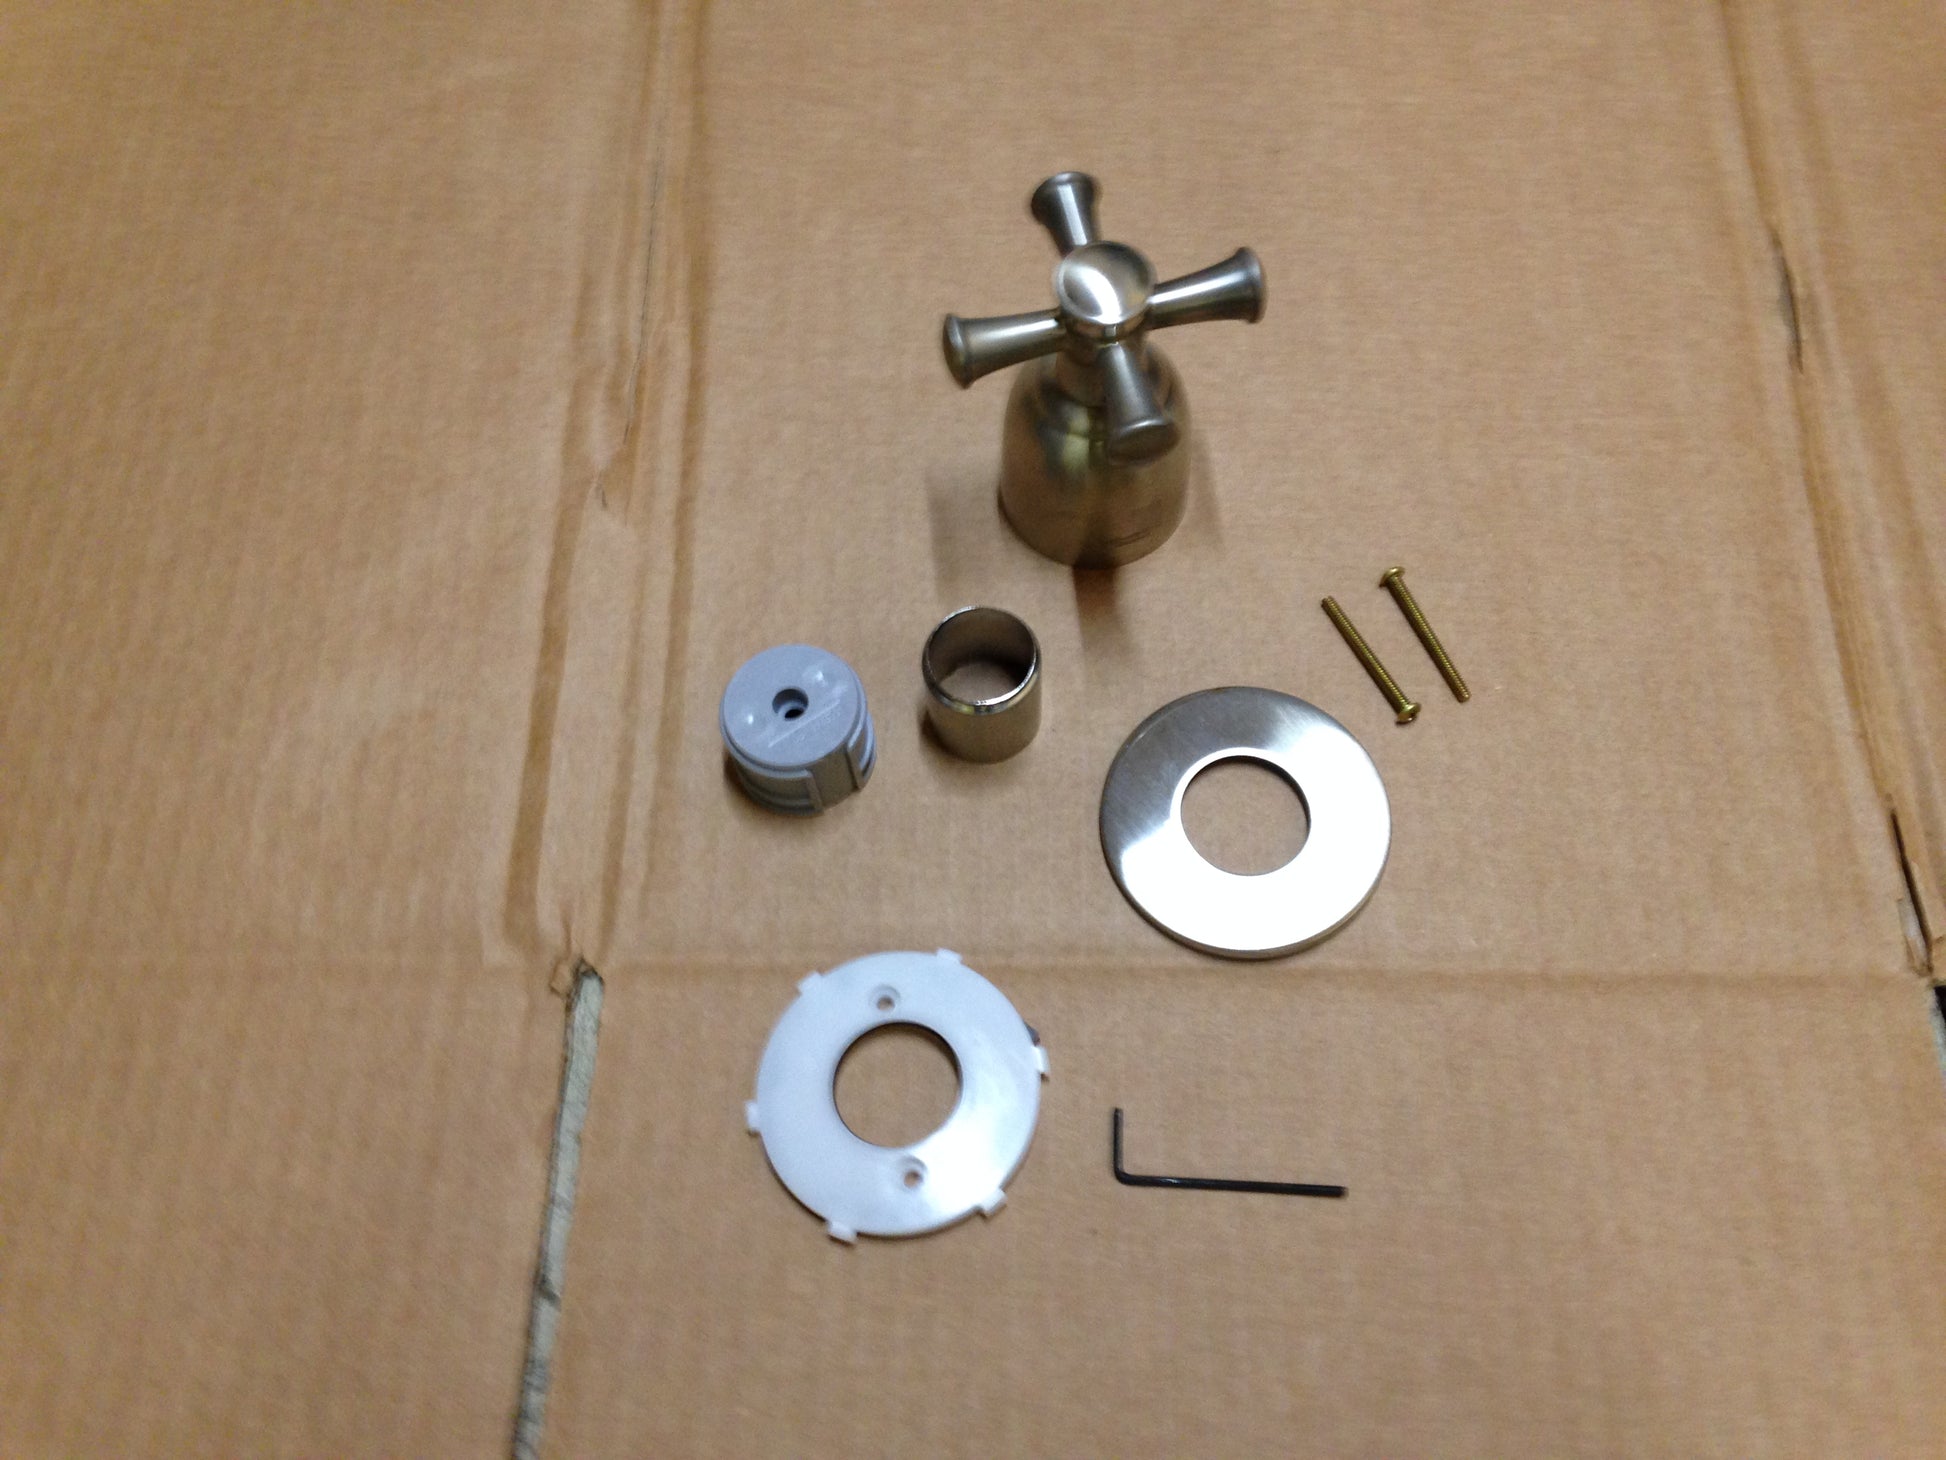 "PORTSMOUTH" ON/OFF VOLUME CONTROL TRIM KIT WITH METAL CROSS HANDLE LESS VALVE